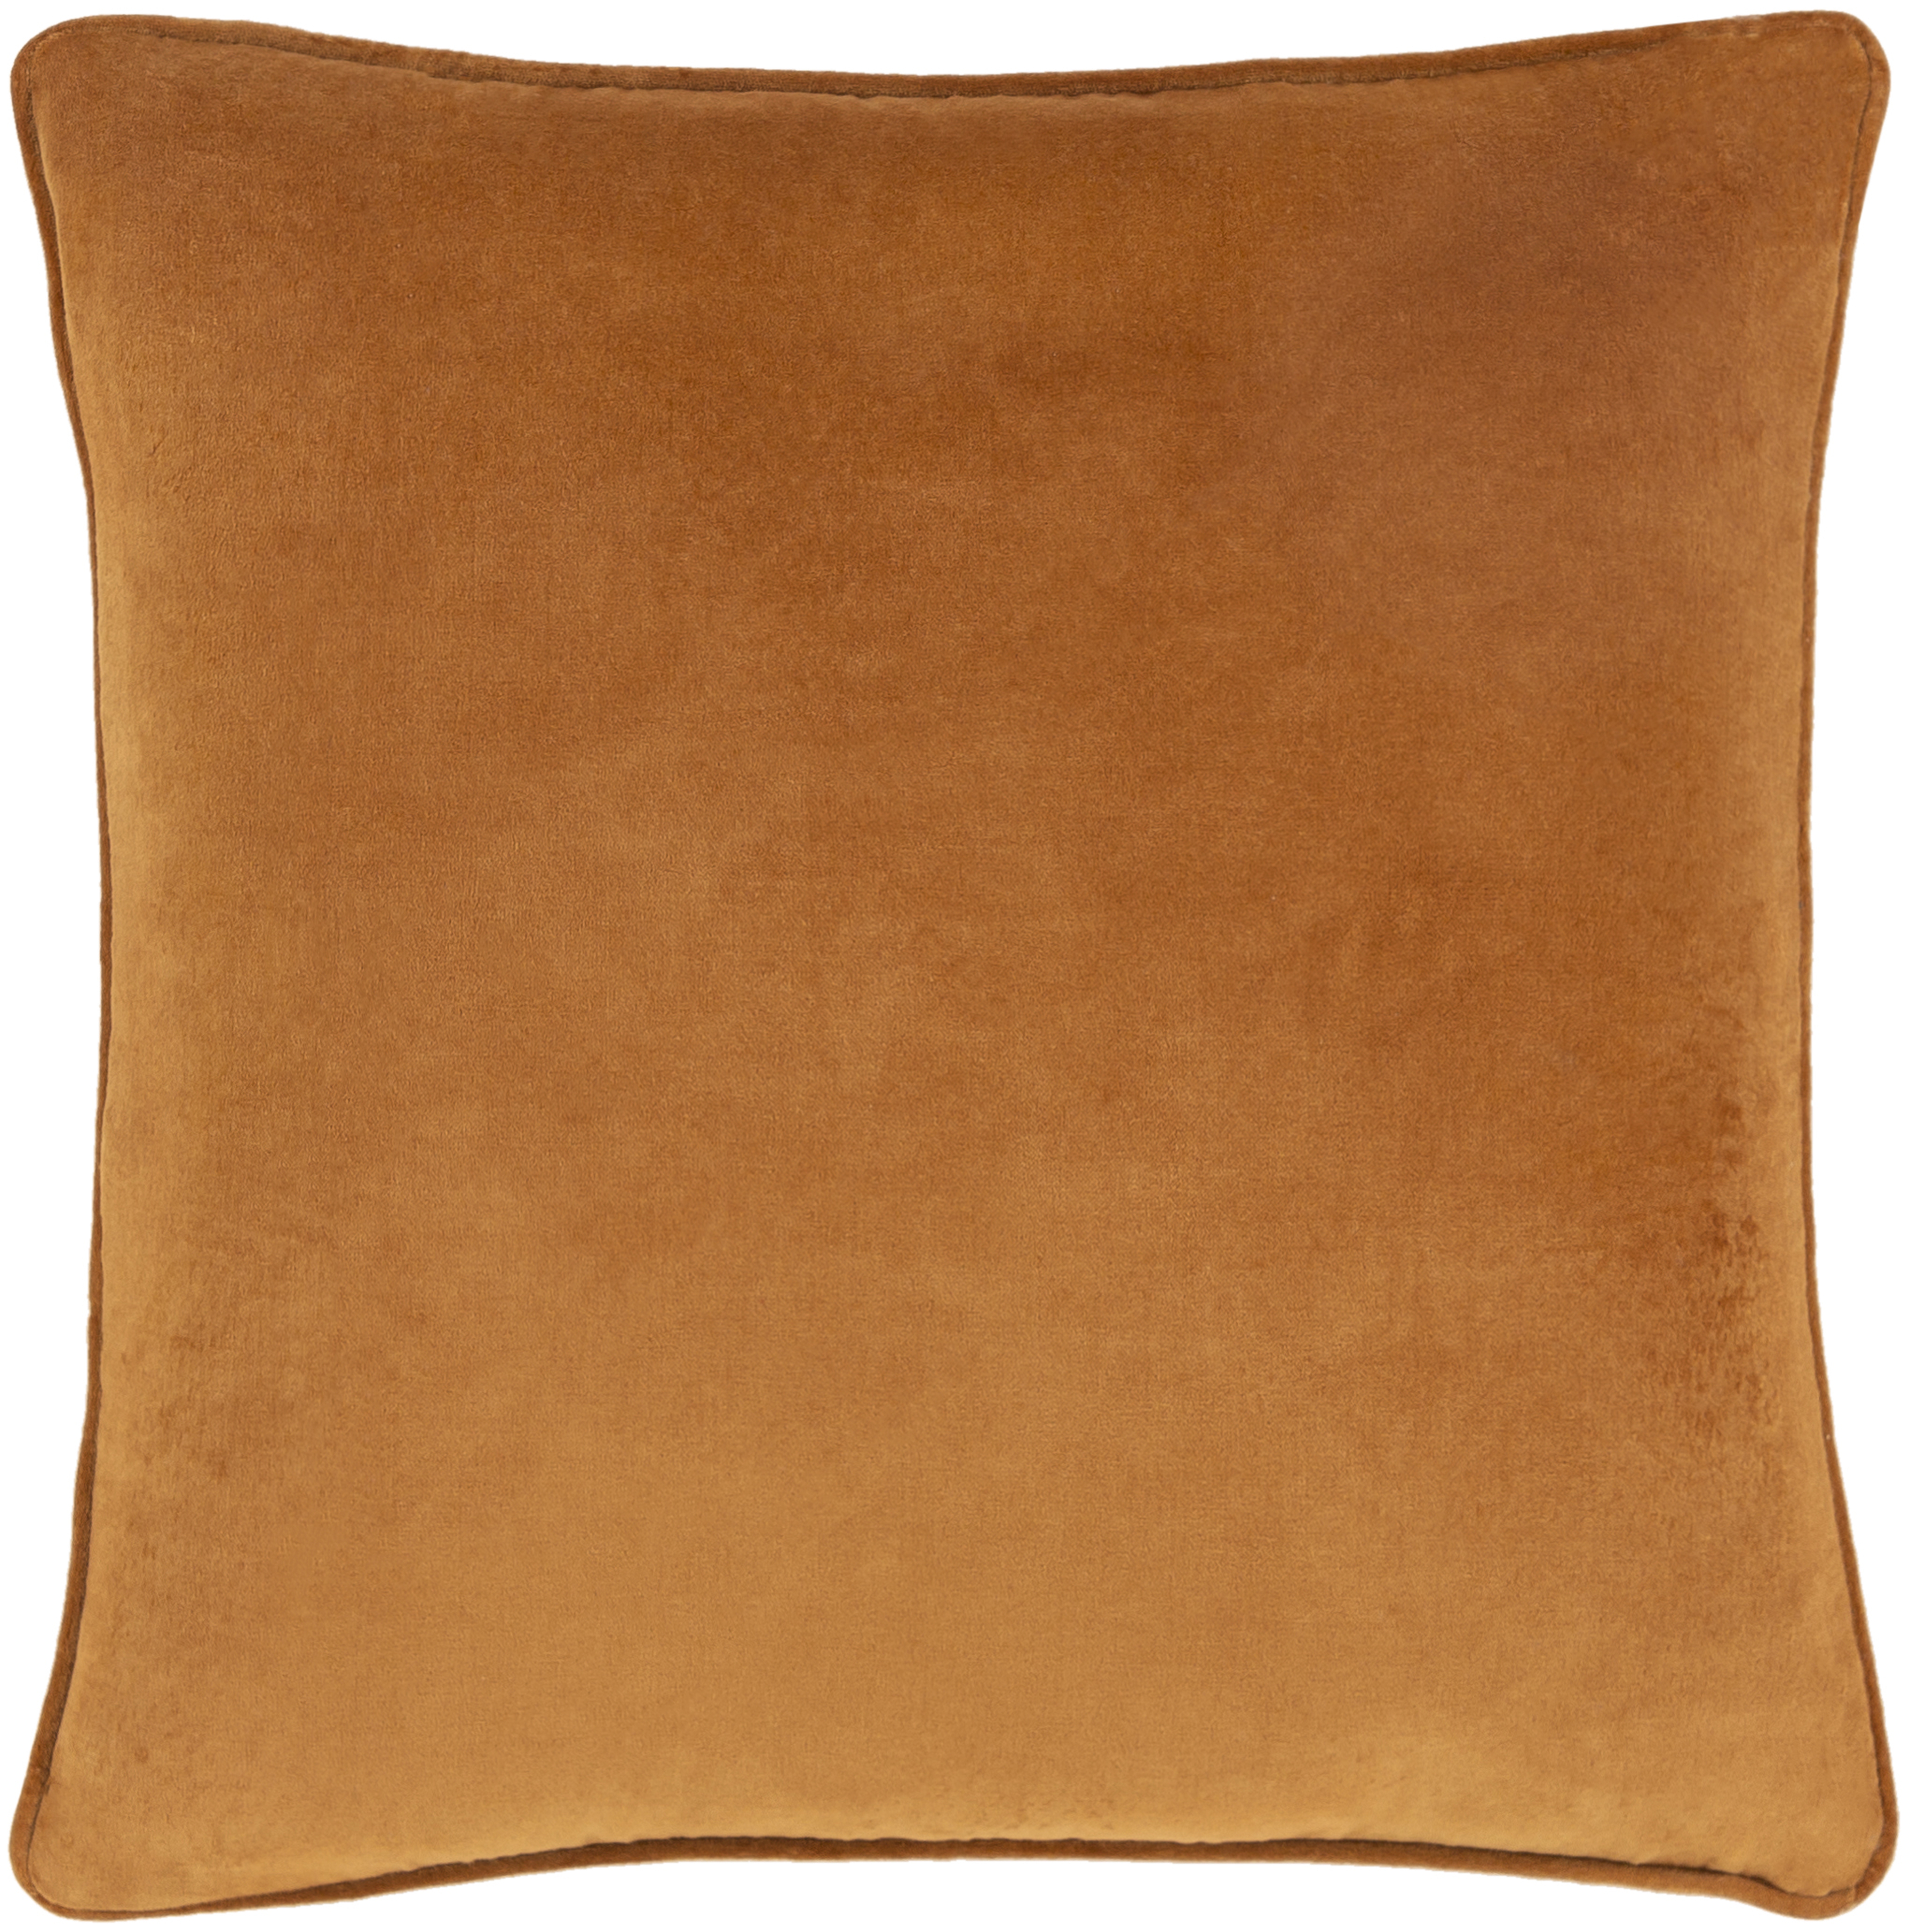 Safflower Throw Pillow, 20" x 20", with poly insert - Surya